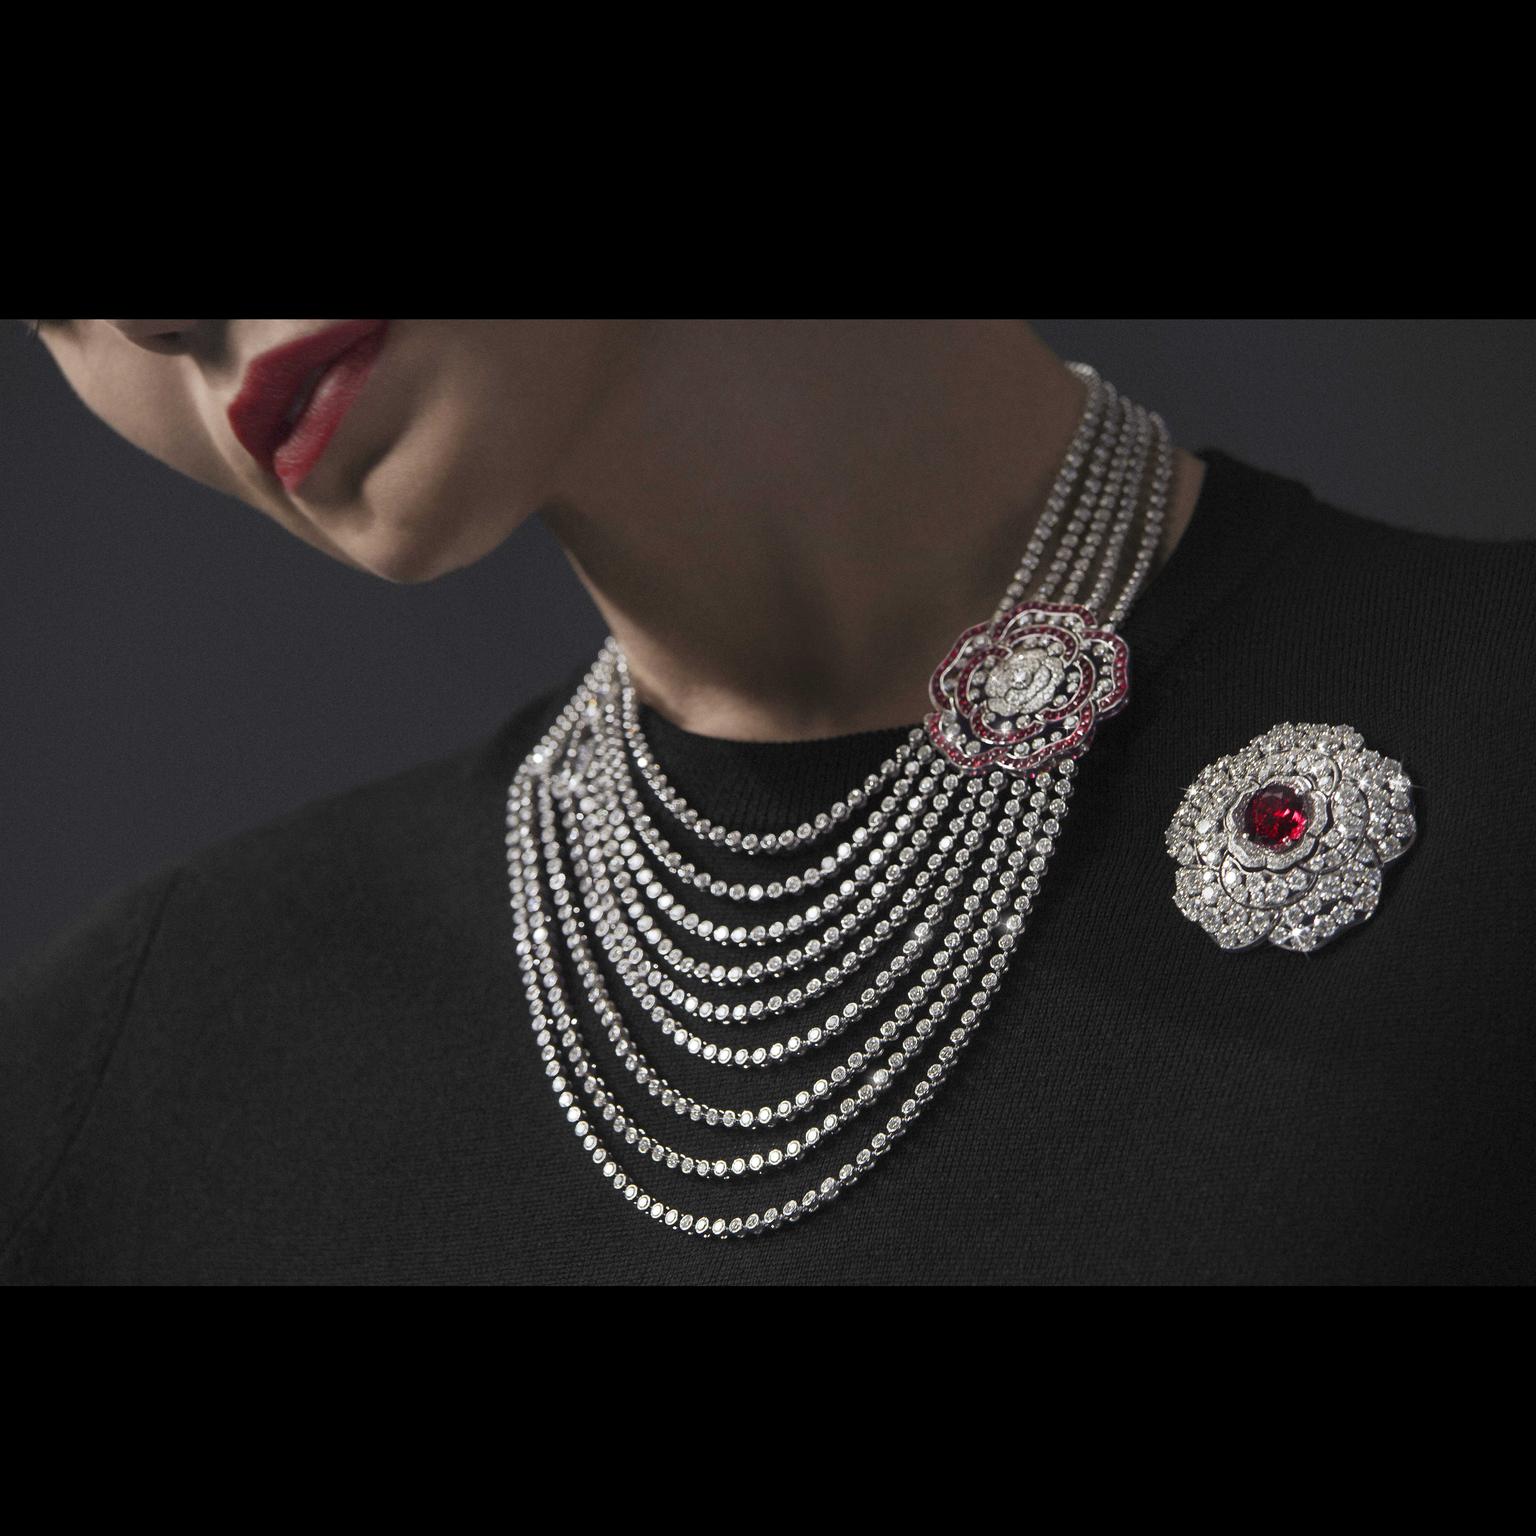 Chanel 1 5 Rouge Incandescente necklace and brooch